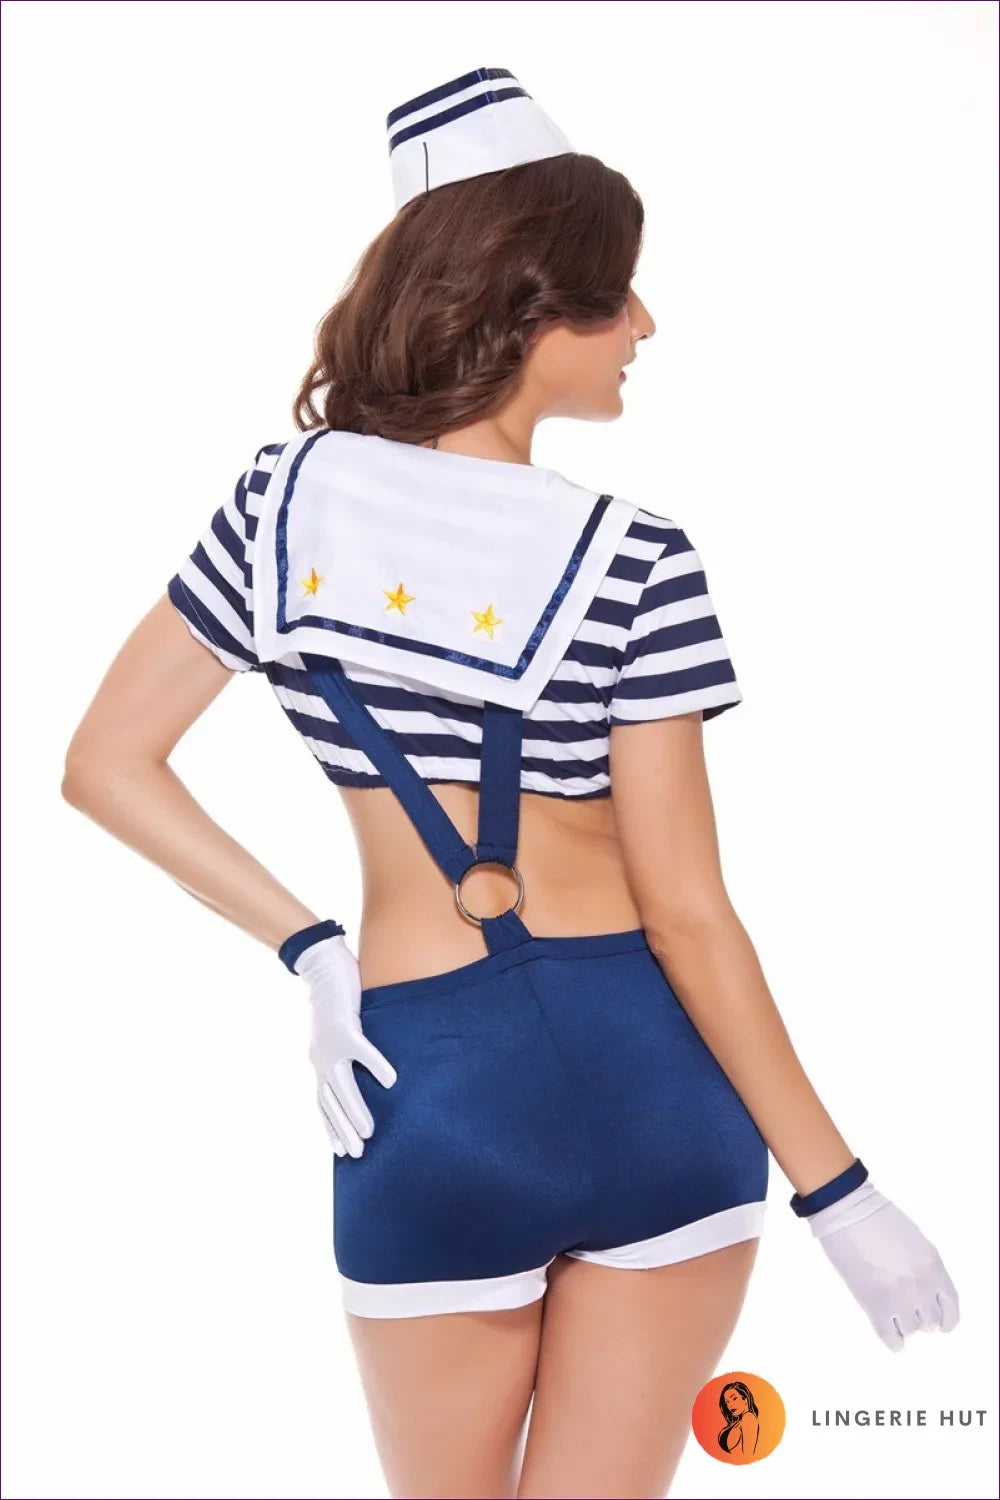 Make a Stylish Statement With Our V-neck Sailor Costume. Ultra-chic Design, Comfort, And Adjustable Fit For